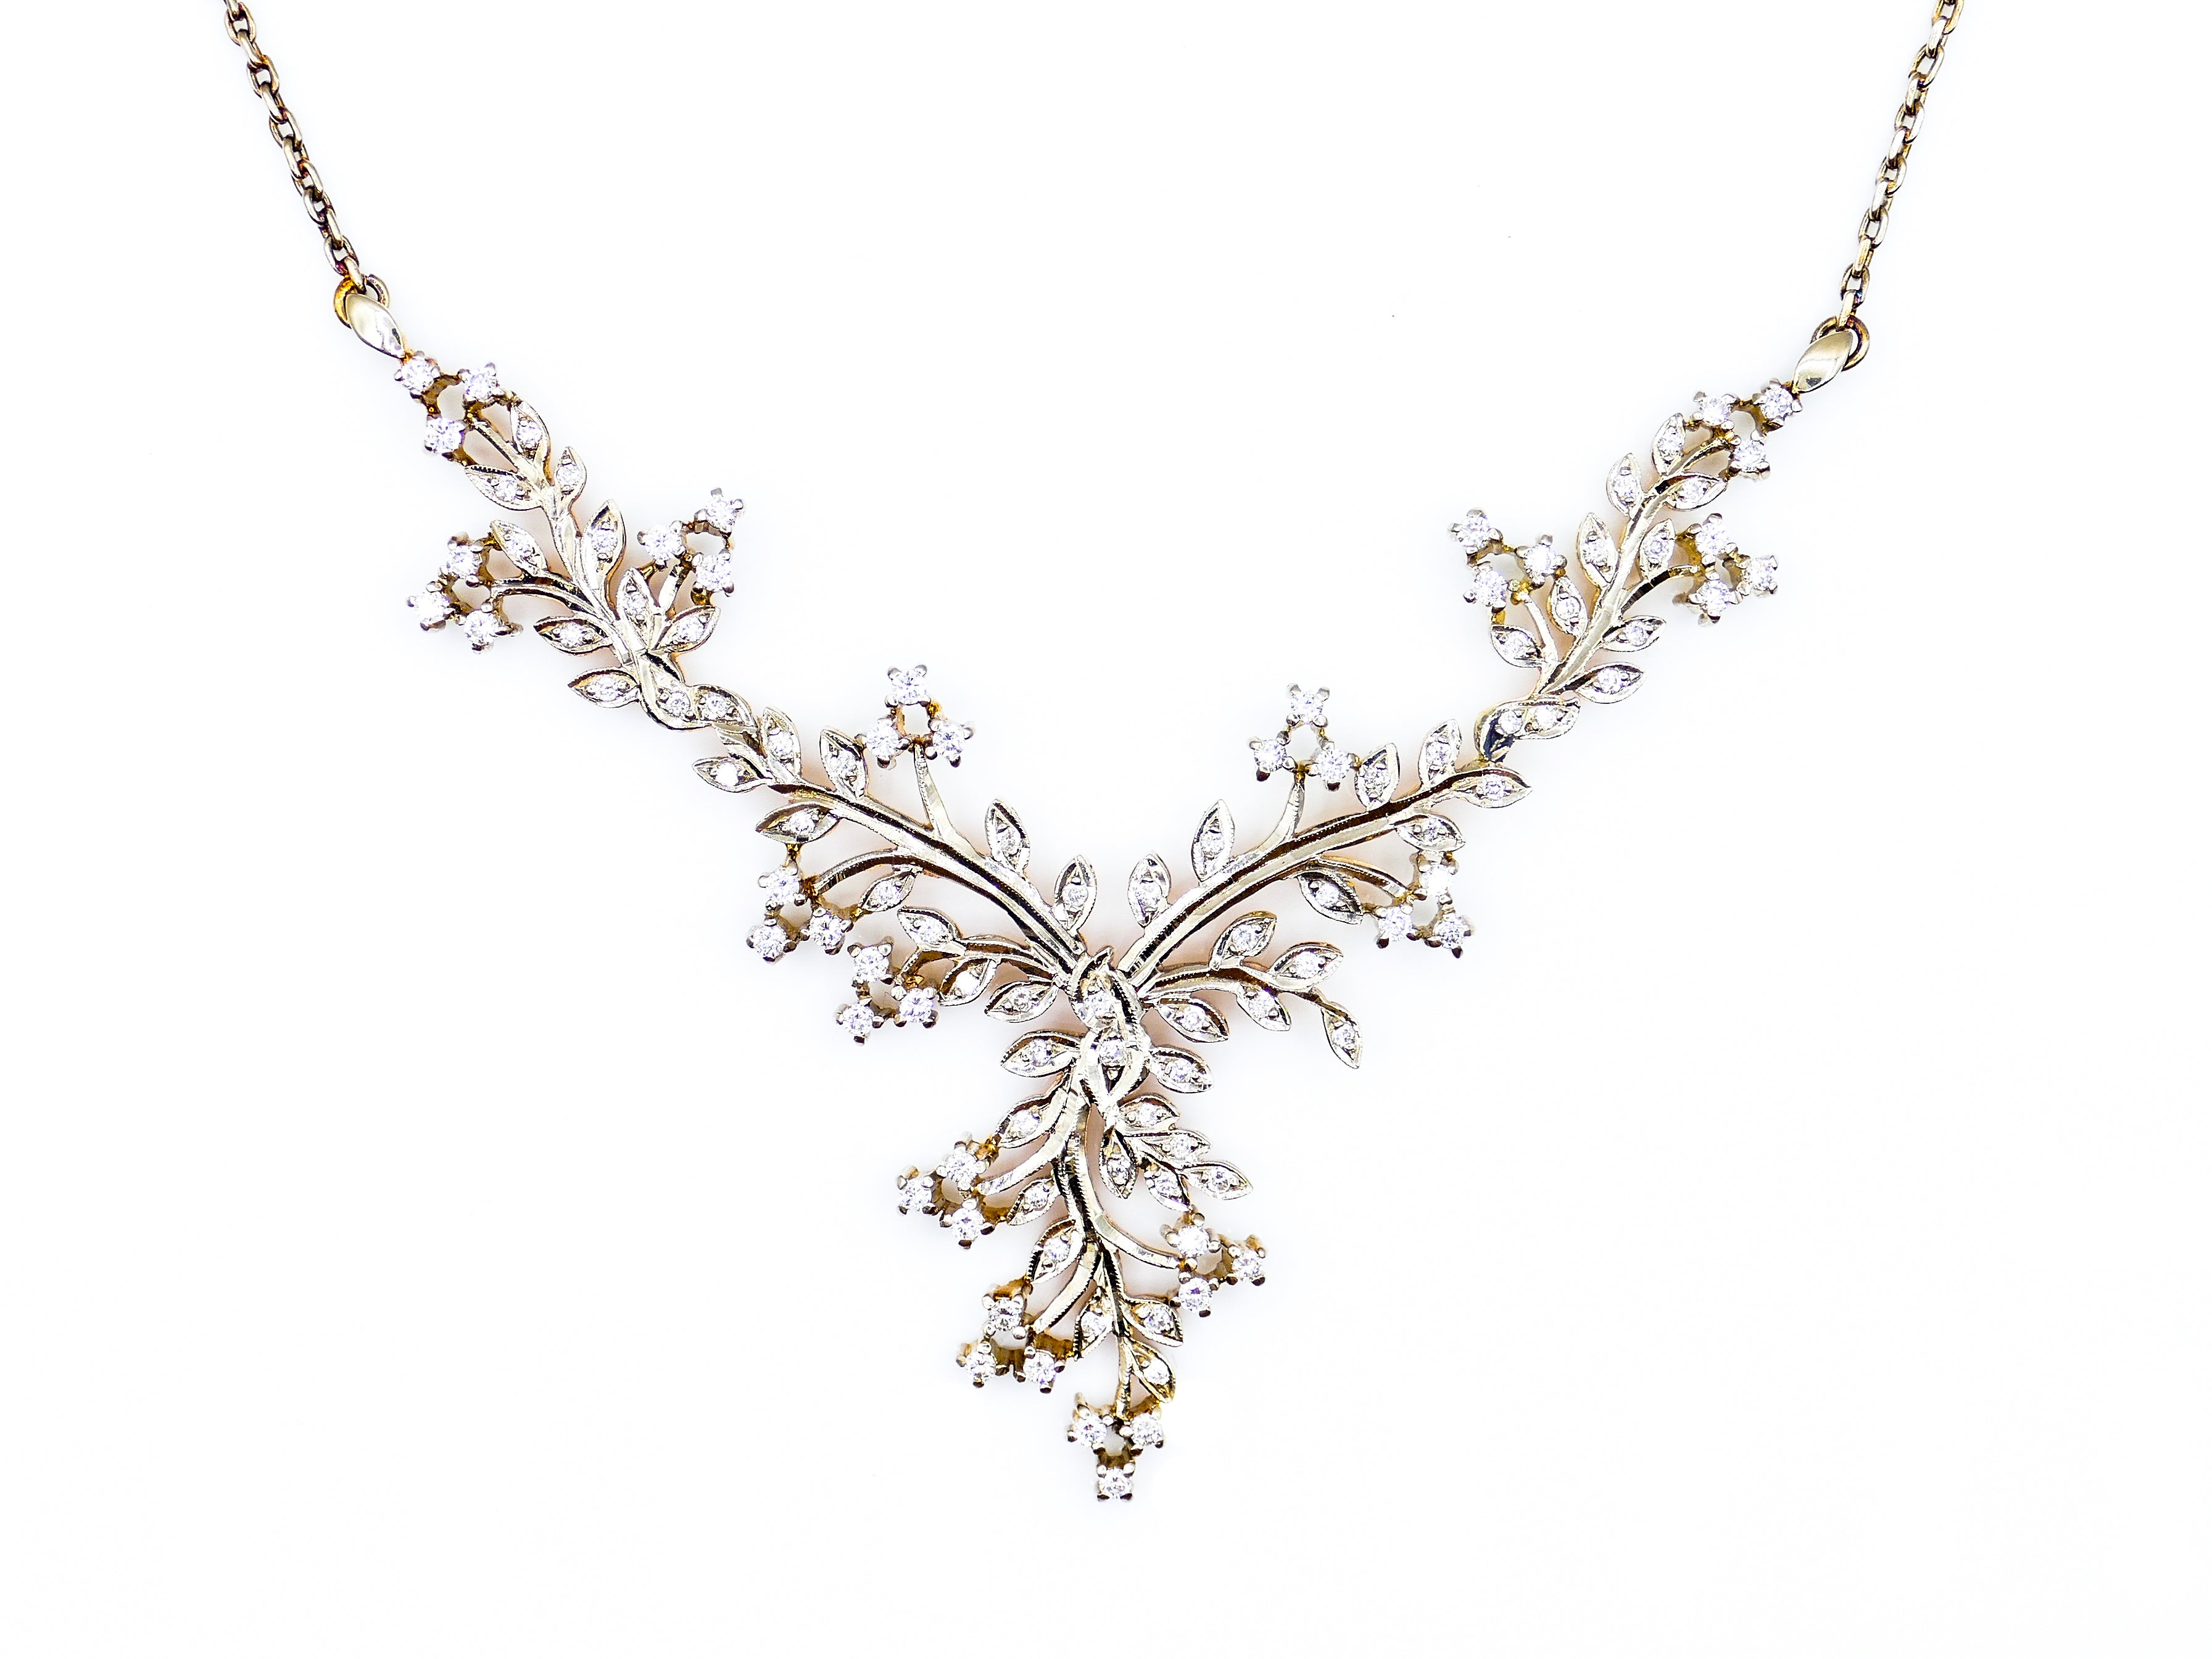 Antique Handmade European Diamond and Yellow Gold Leaf Necklace